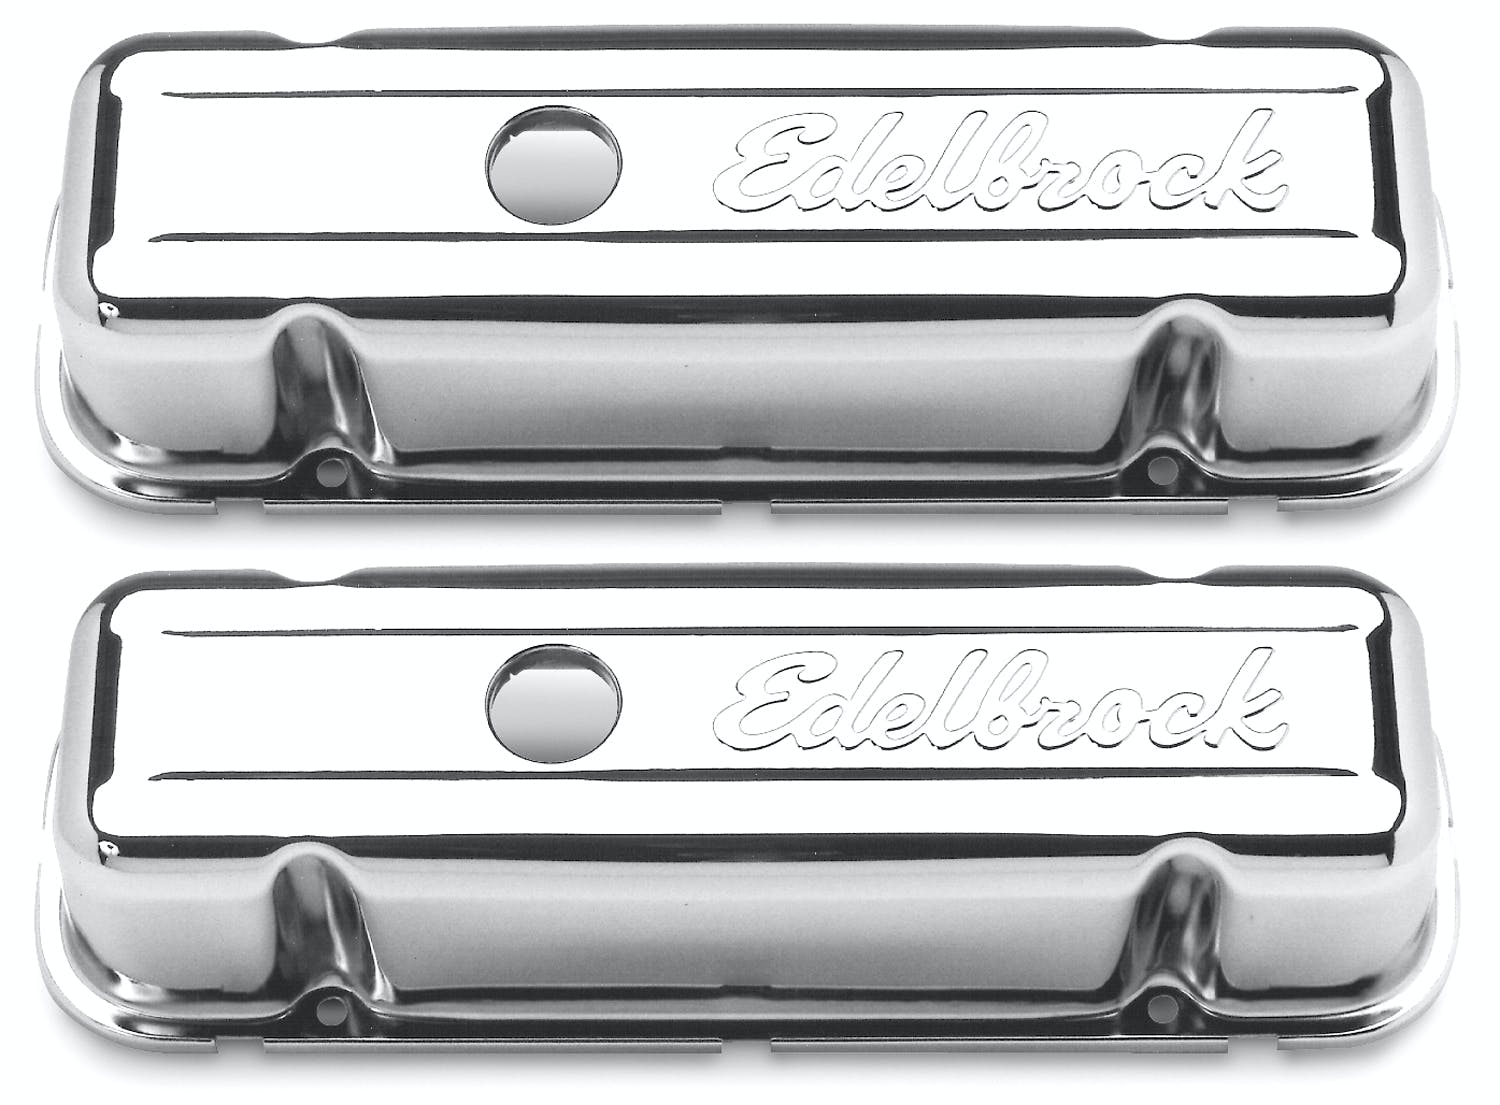 Edelbrock 4486 Signature Series Valve Covers for Buick 3.8L and 4.1L V6 77 and Later